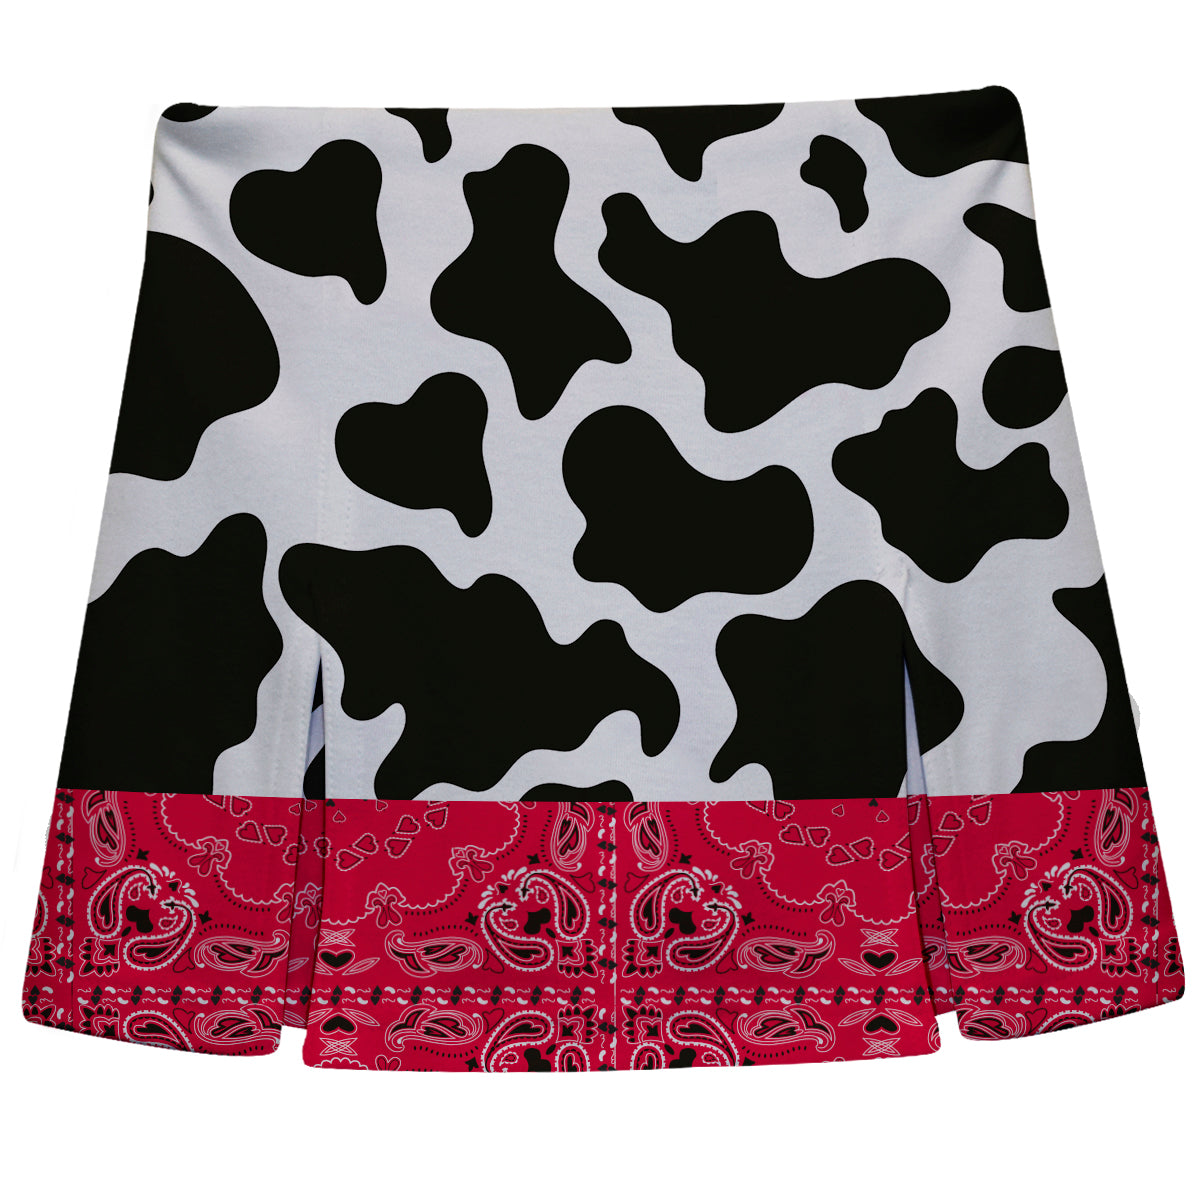 Western Cow White and Black Skort - Wimziy&Co.